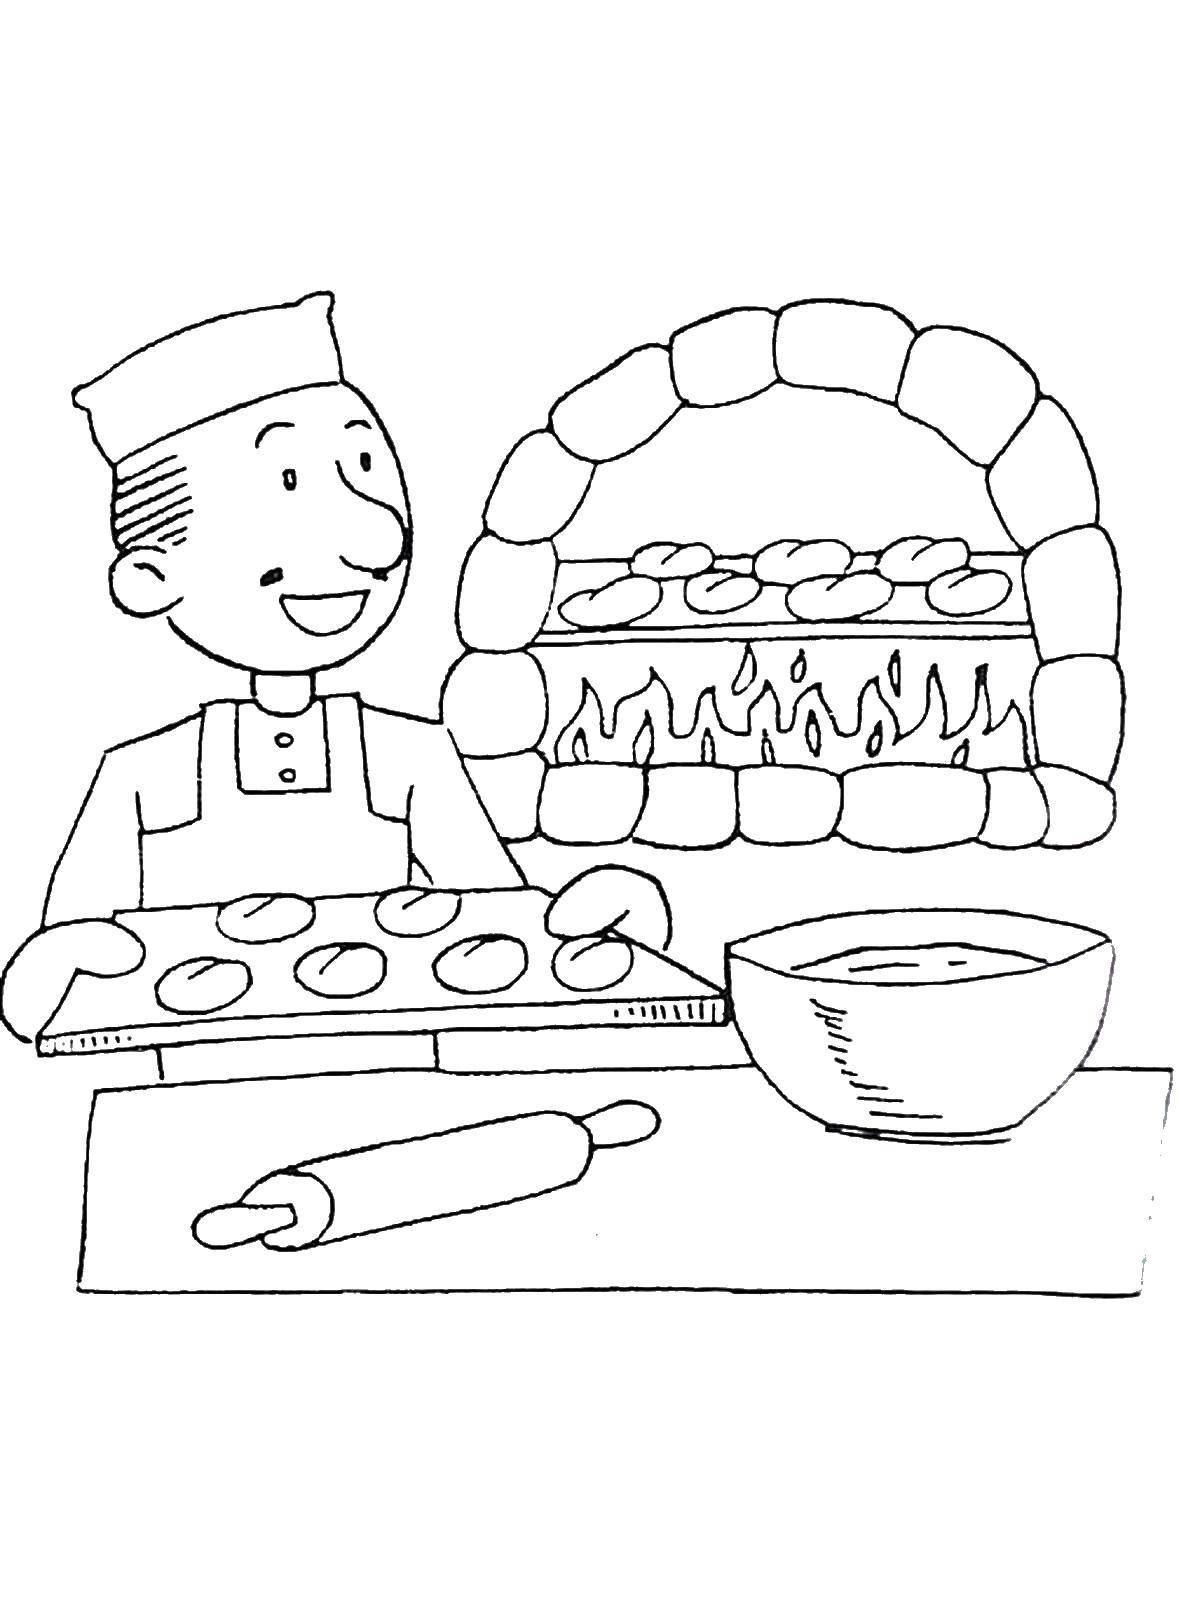 Coloring Baker. Category a profession. Tags:  a profession, a Baker, a stove.